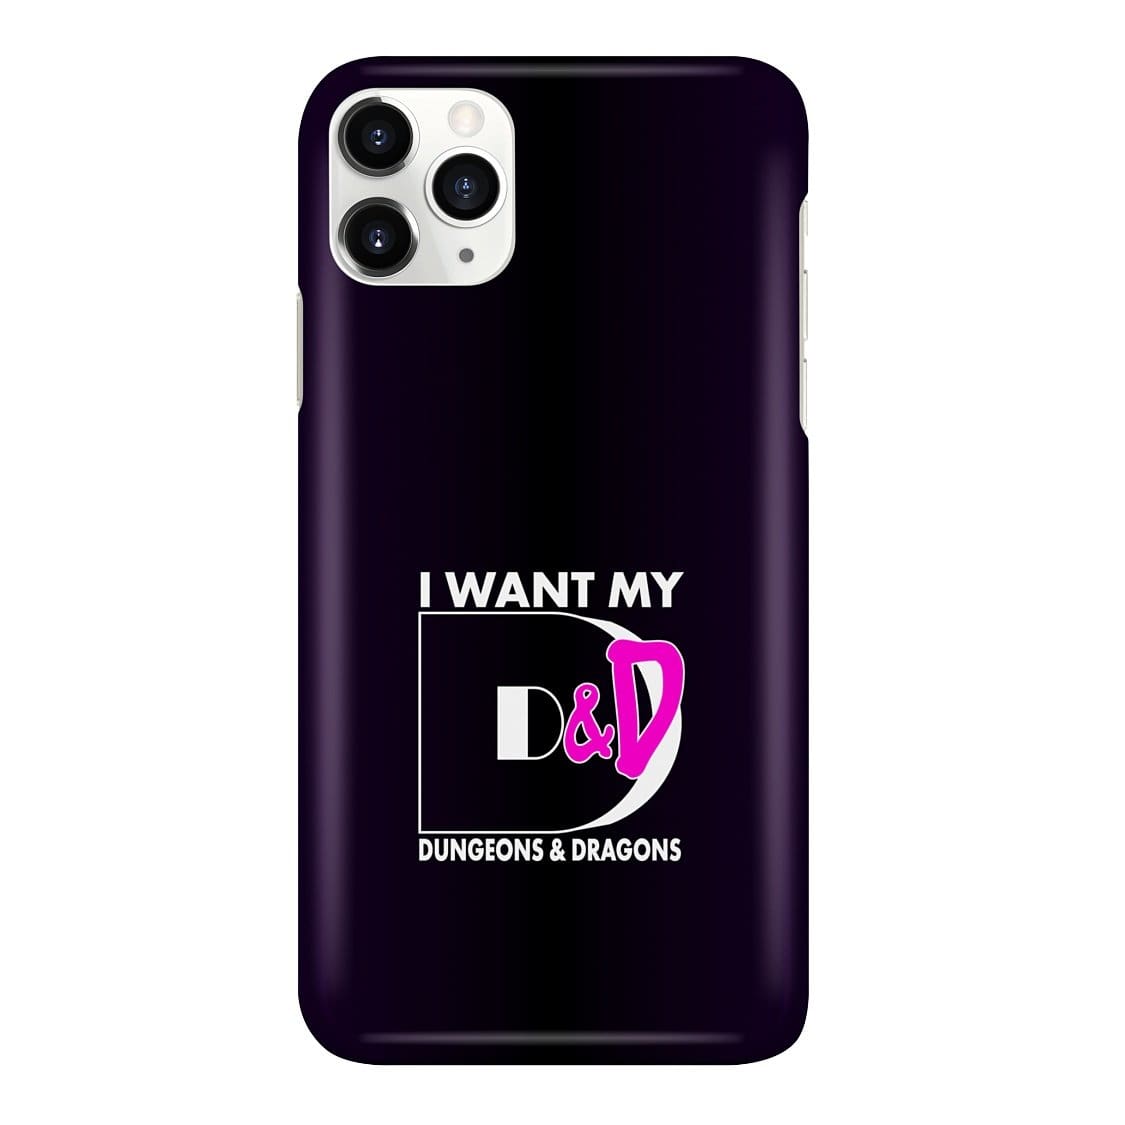 I Want My D&D Dungeons and Dragons Phone Case - Snap * iPhone * Samsung * - iPhone 11 Pro Max Case / Gloss / Apparel